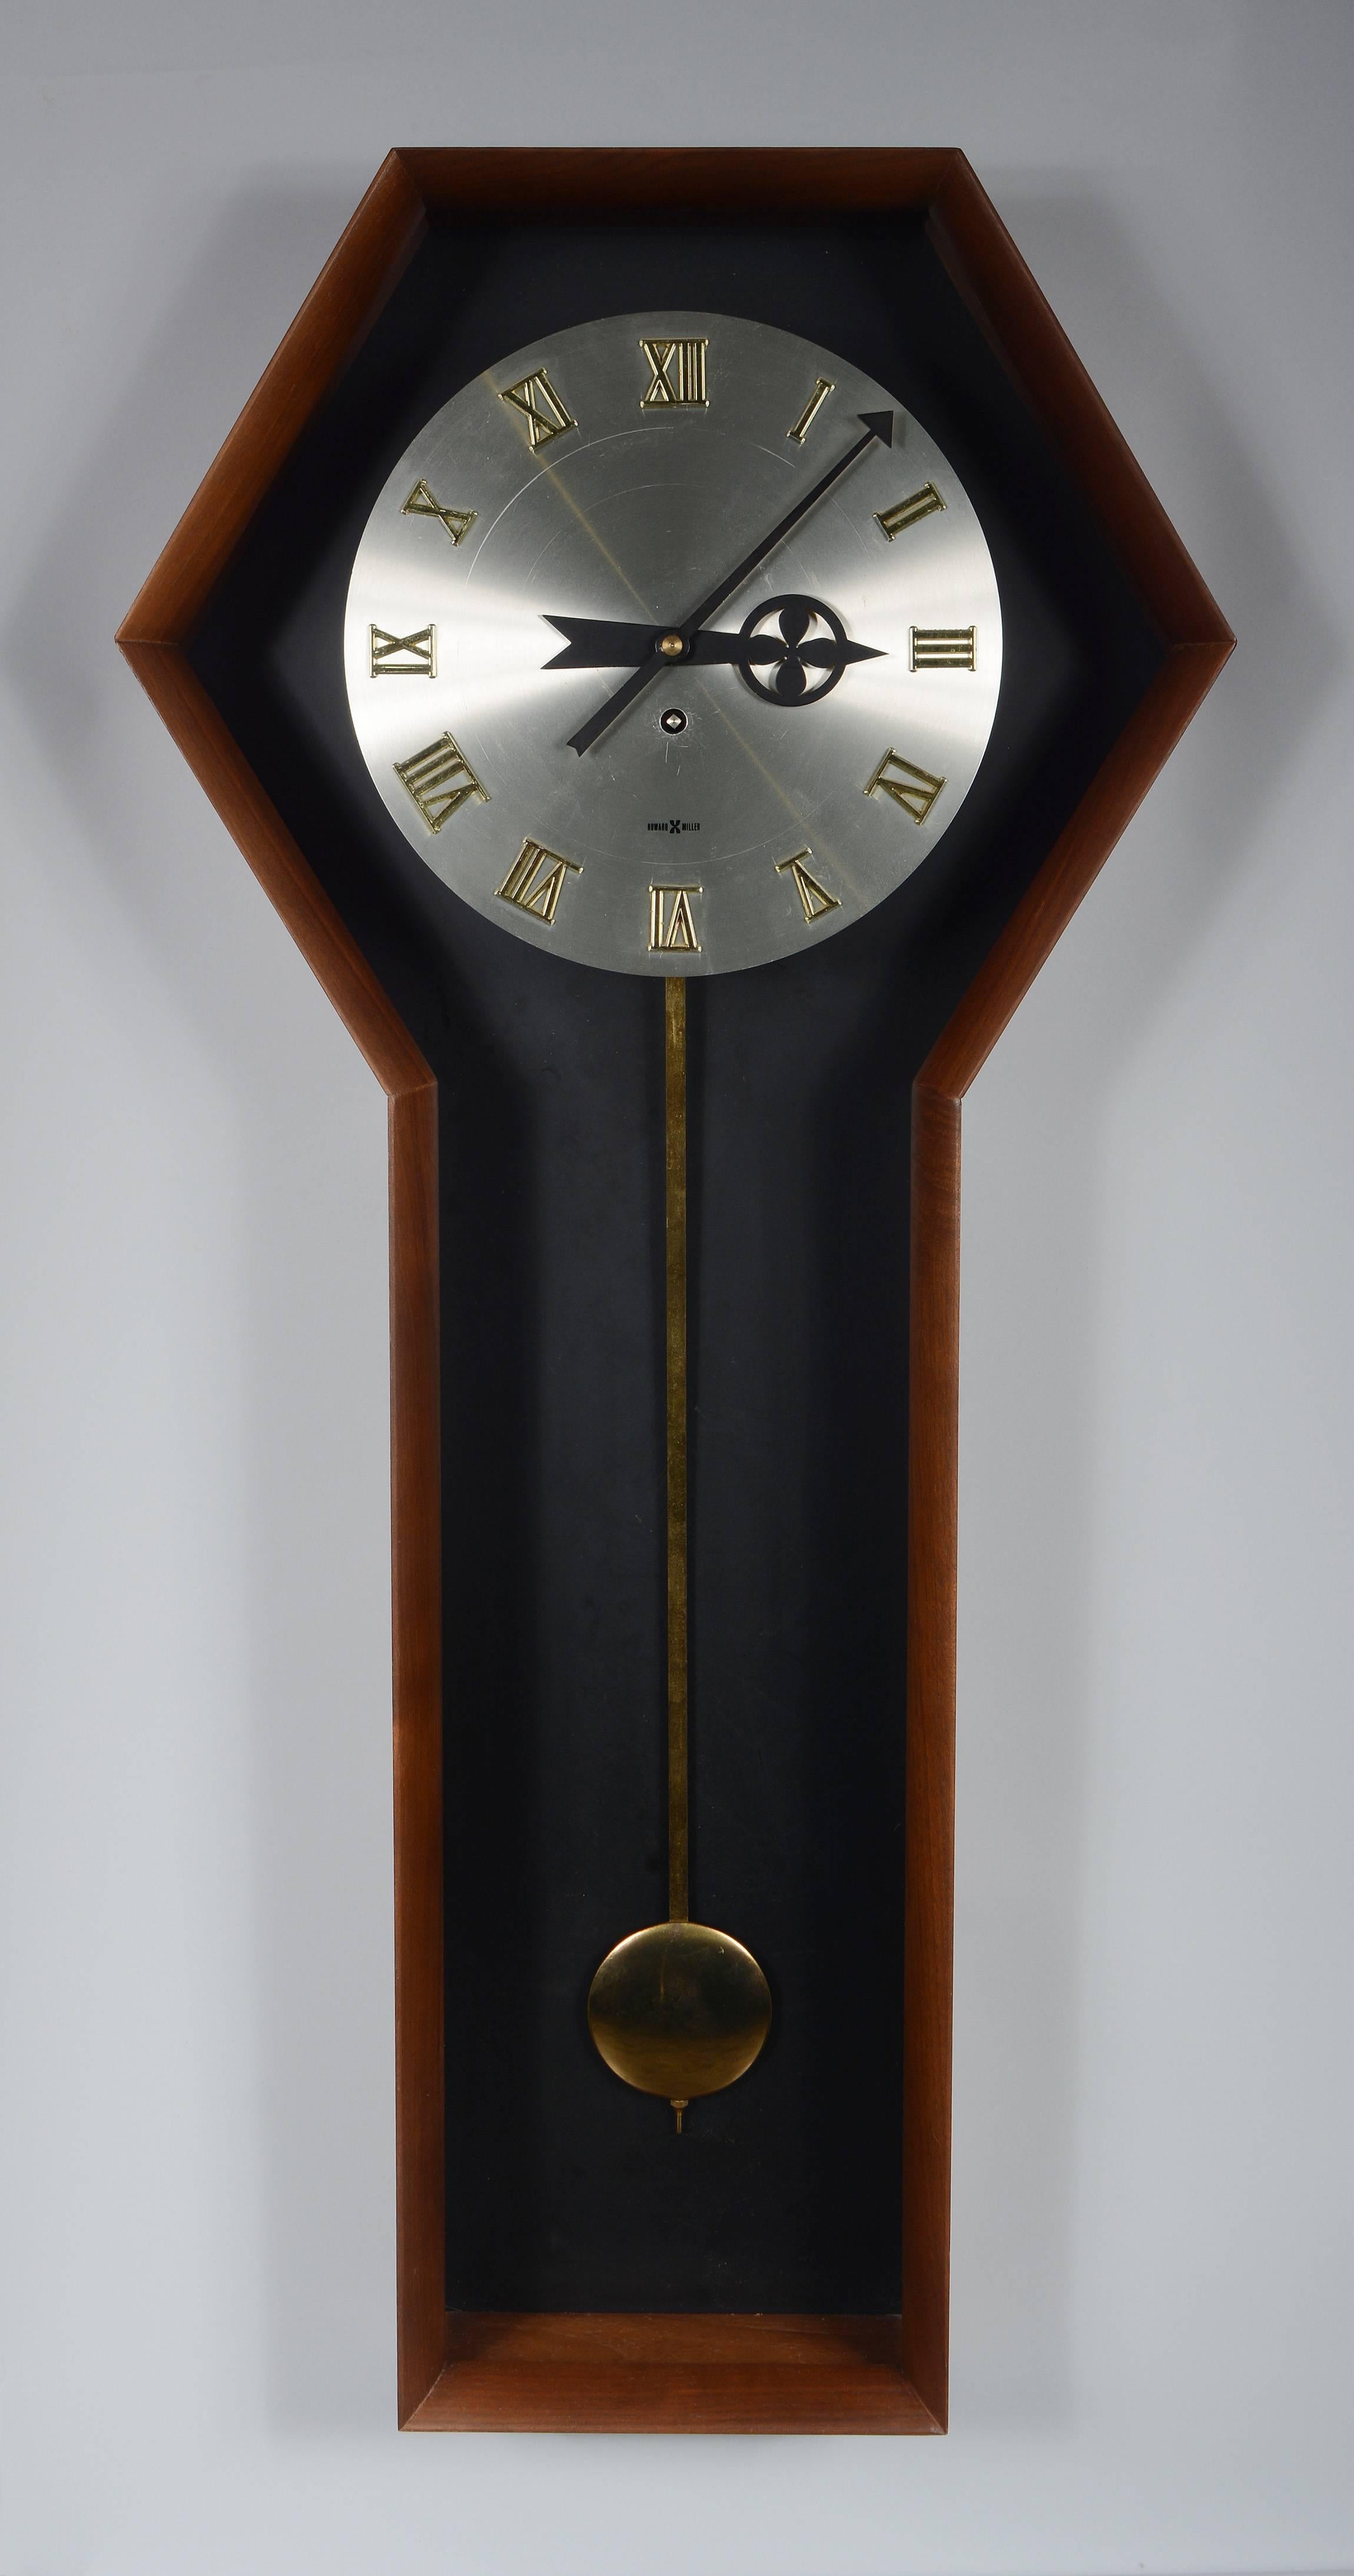 Howard Miller pendulum wall clock designed by Arthur Umanoff. This clock has a walnut case with a floating aluminum face. The clock has an eight day movement. It runs and keeps time.